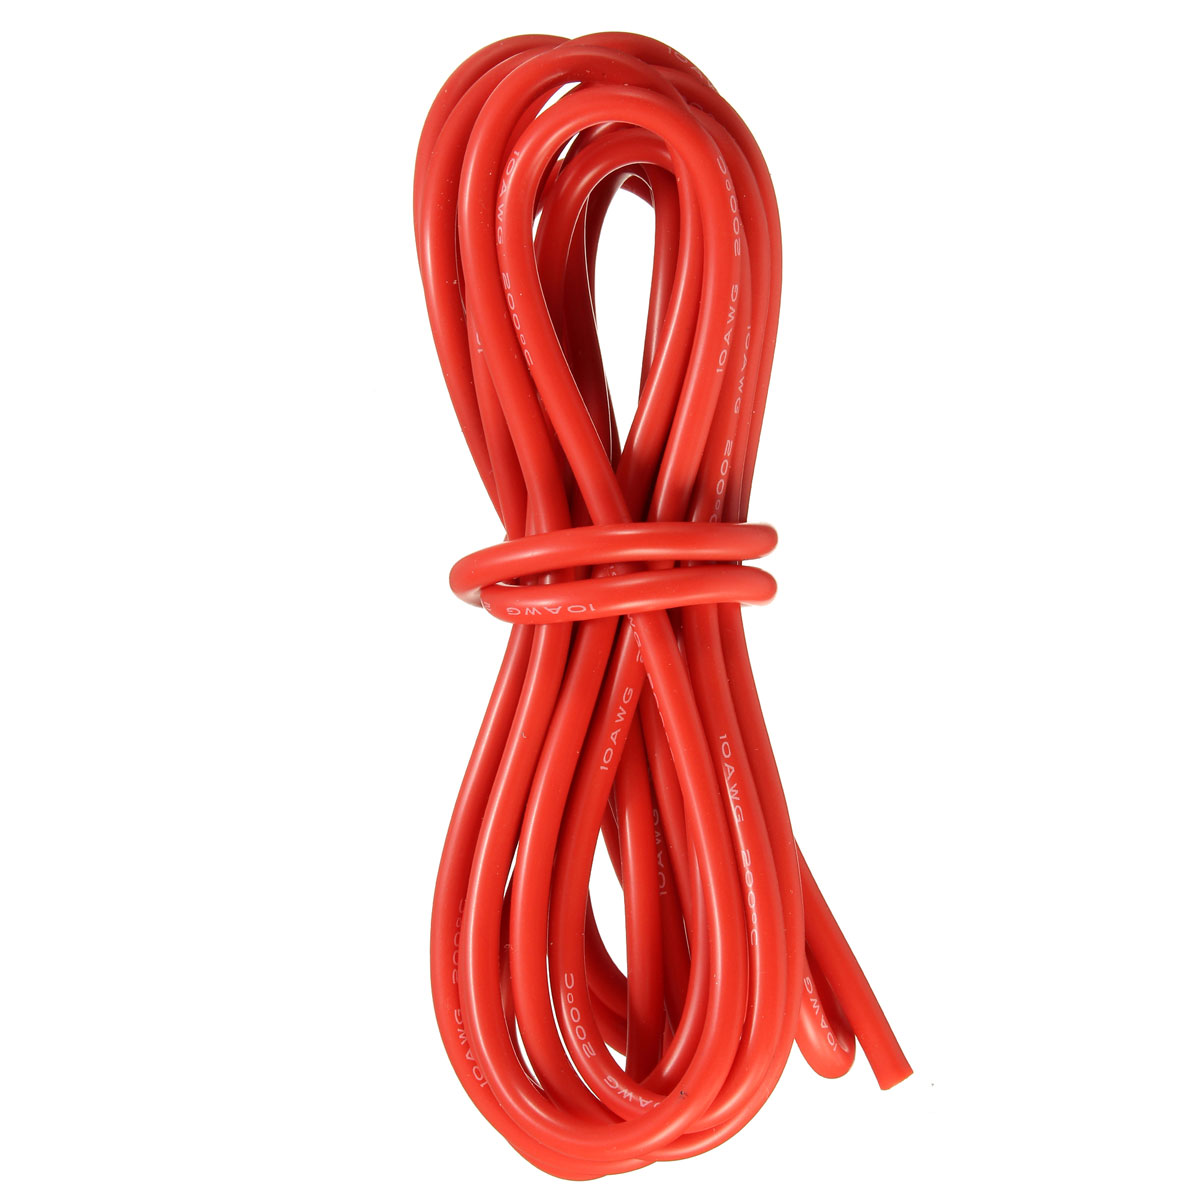 DANIU-5-Meter-Red-Silicone-Wire-Cable-10121416182022AWG-Flexible-Cable-1170292-3